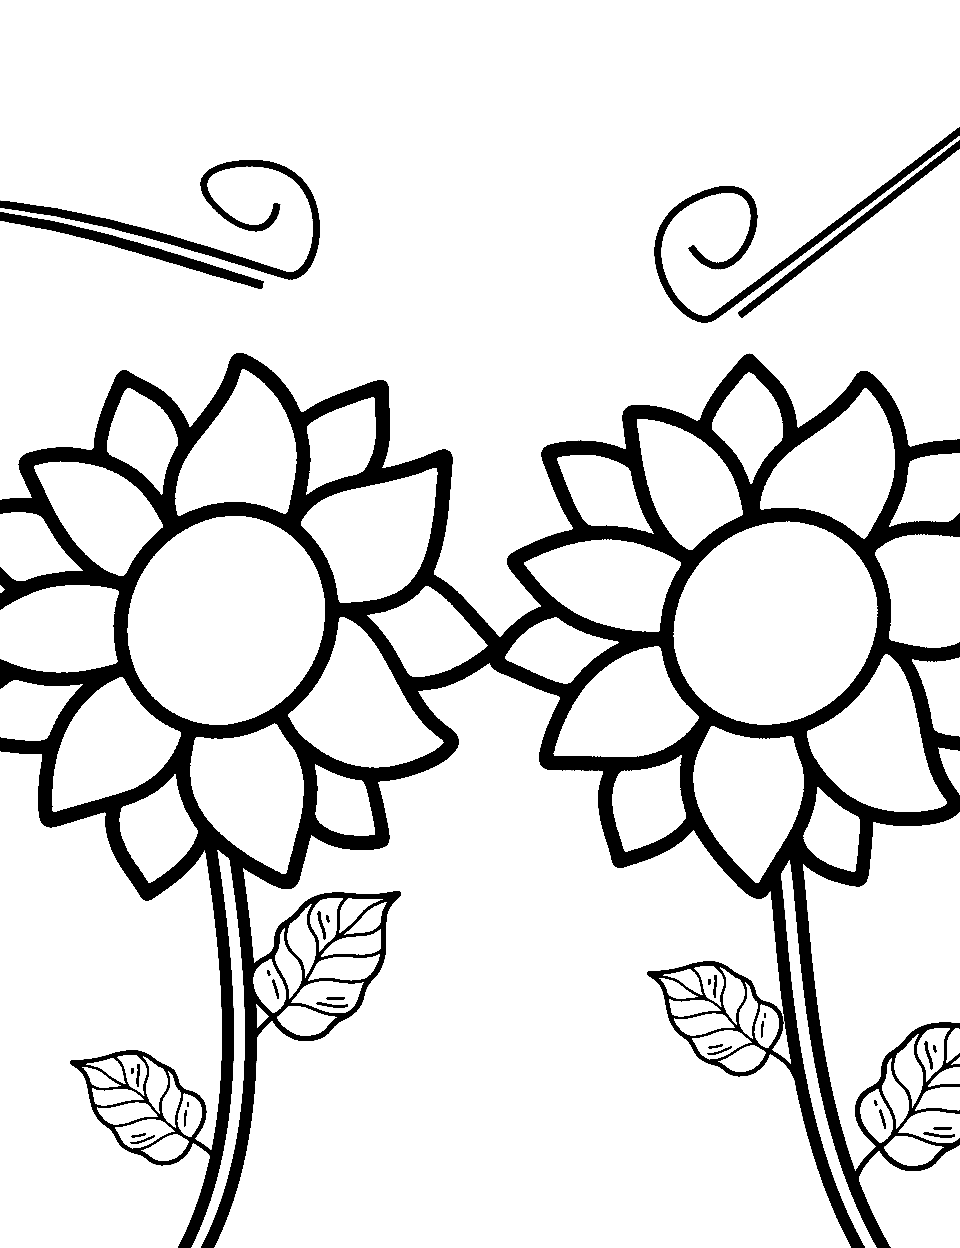 Sunflower Serenade Coloring Page - Sunflowers swaying in the breeze.